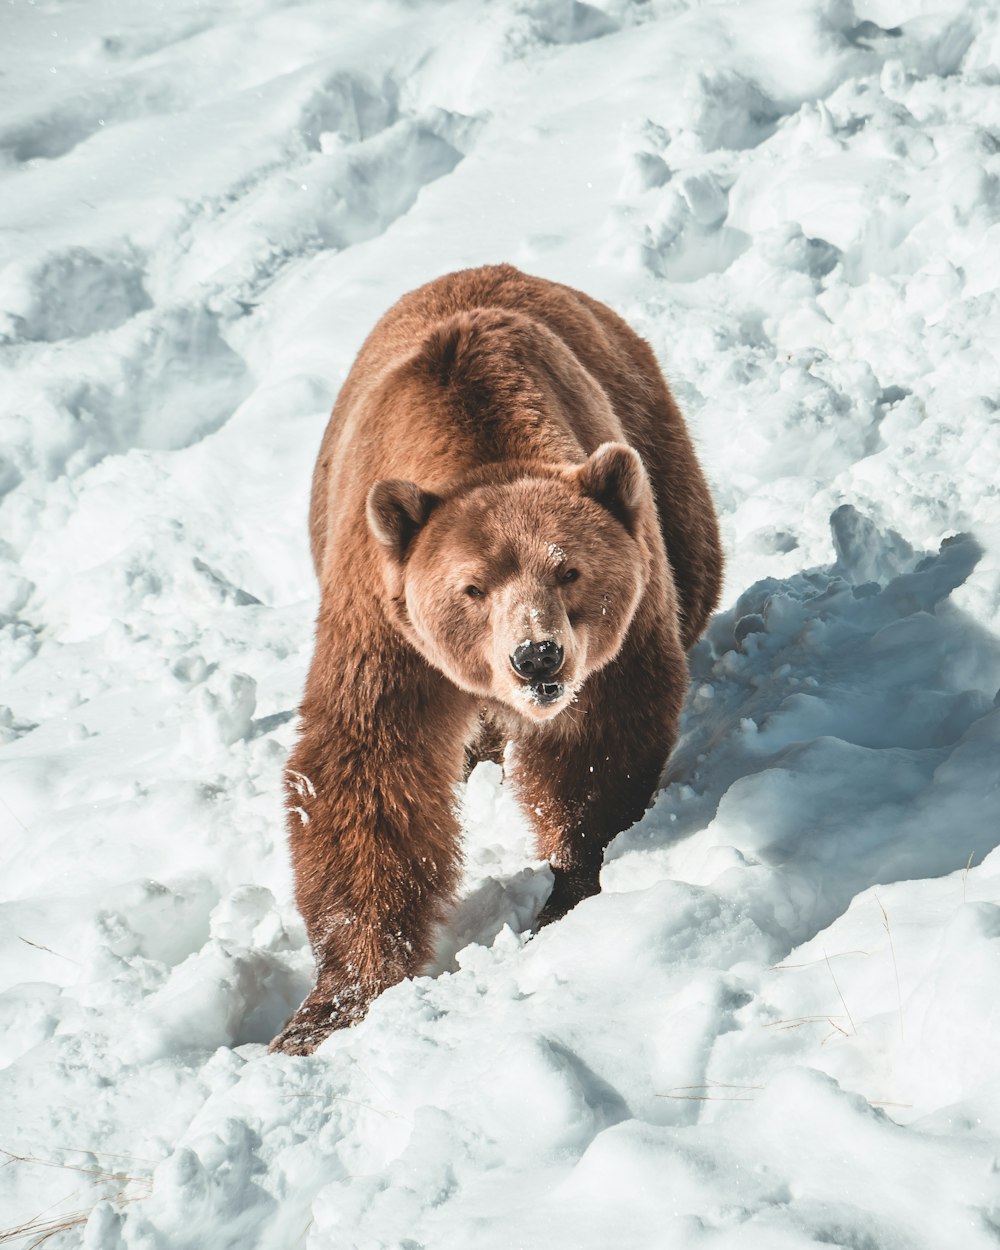 brown bear on snow covered ground during daytime